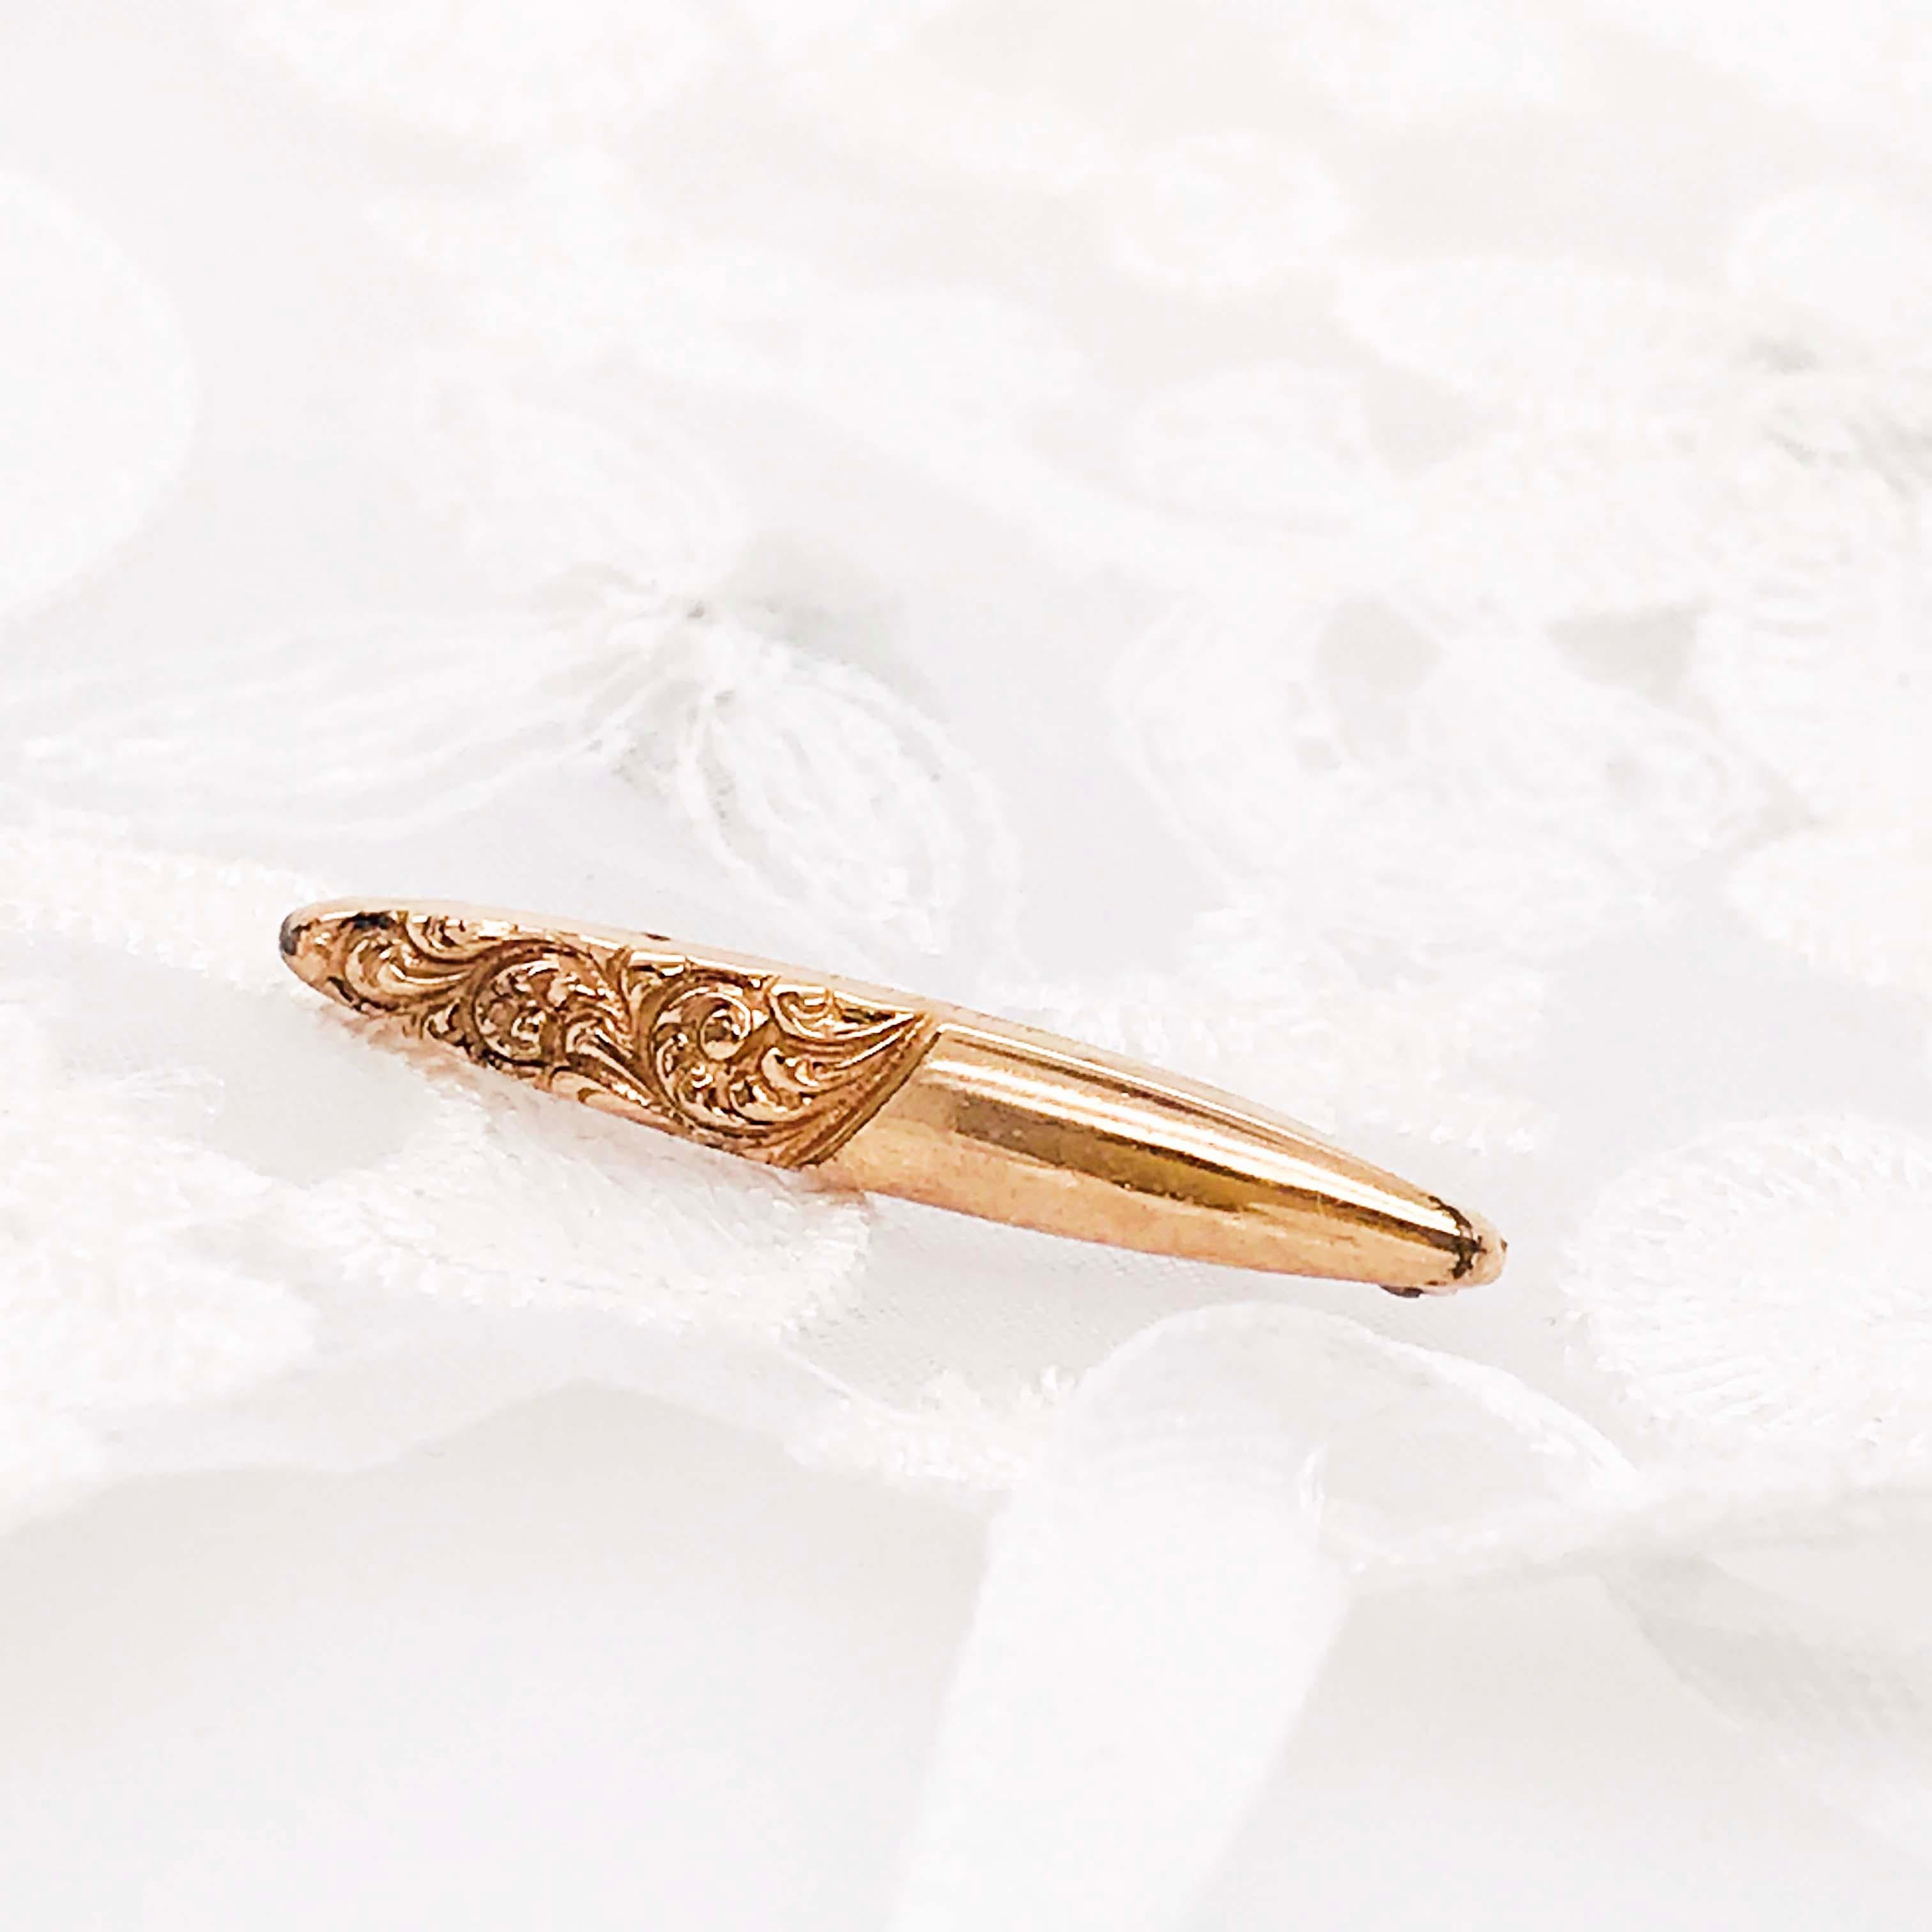 This Antique Rose Pin is so special. This one of a kind piece was handmade CIRCA 1910. The pin is lightweight and dainty, the perfect accessory for any outing! On this brooch, there is a delicate hand engraving that is very whimsical and adds